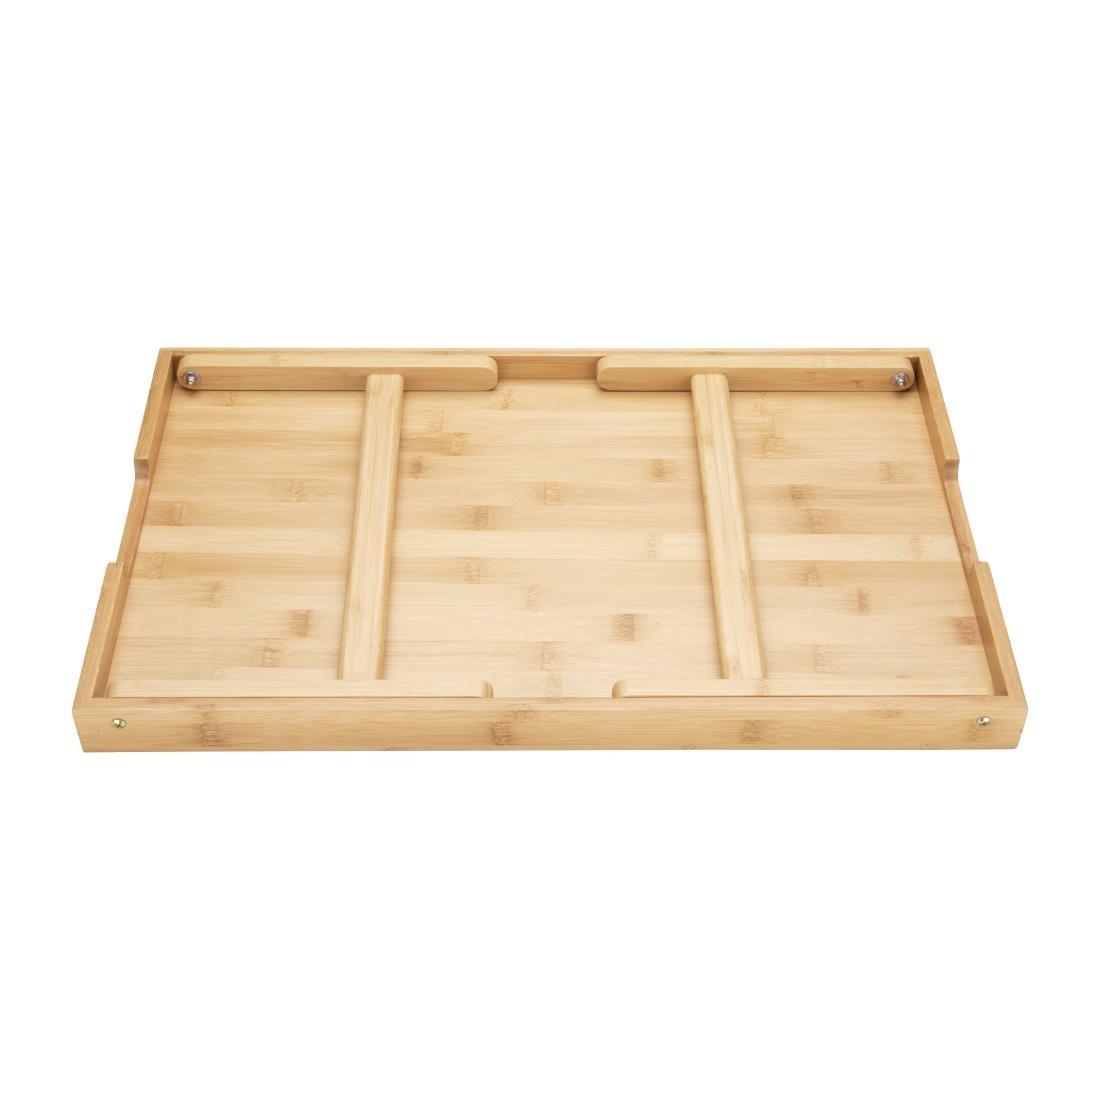 Olympia Bamboo Room Service Tray 625x315x215mm - DT433  - 4